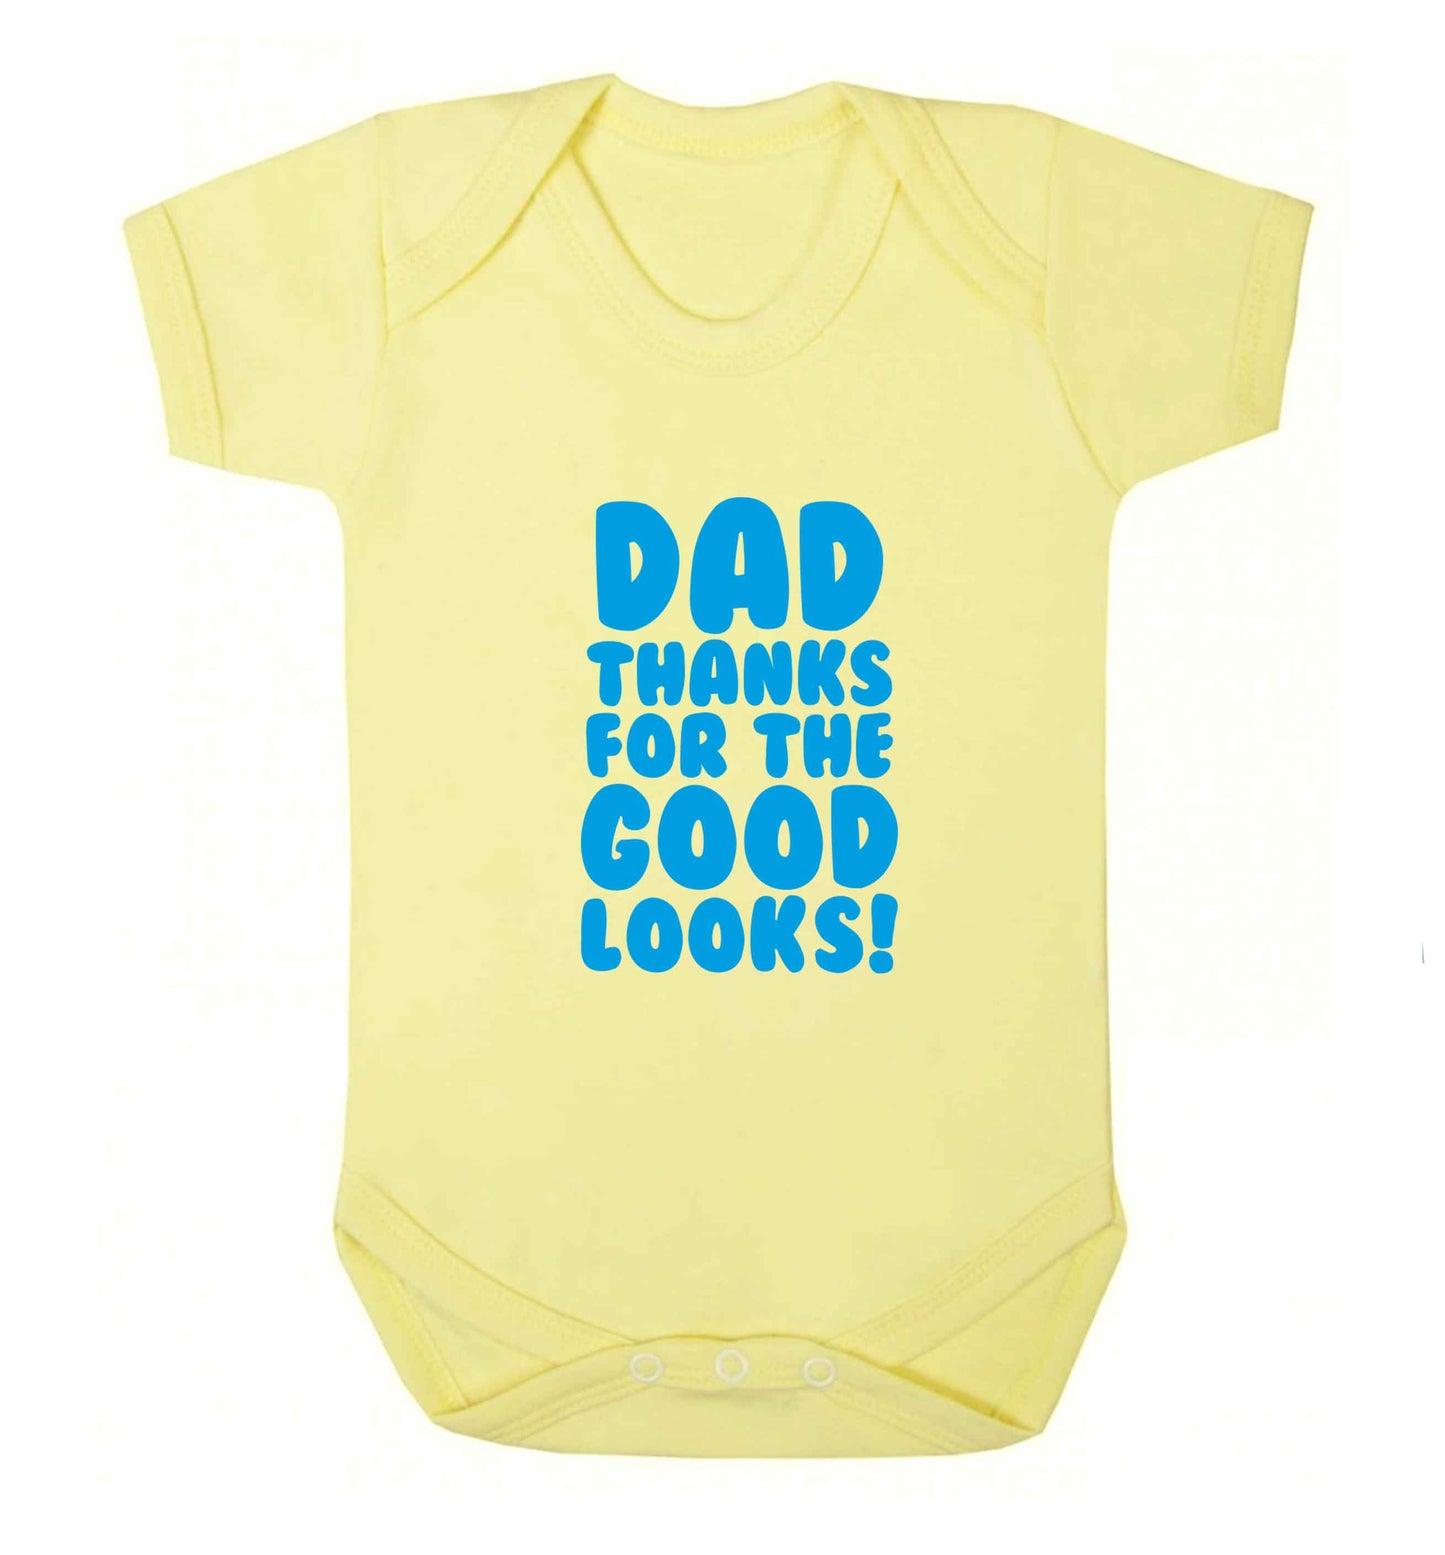 Dad thanks for the good looks baby vest pale yellow 18-24 months